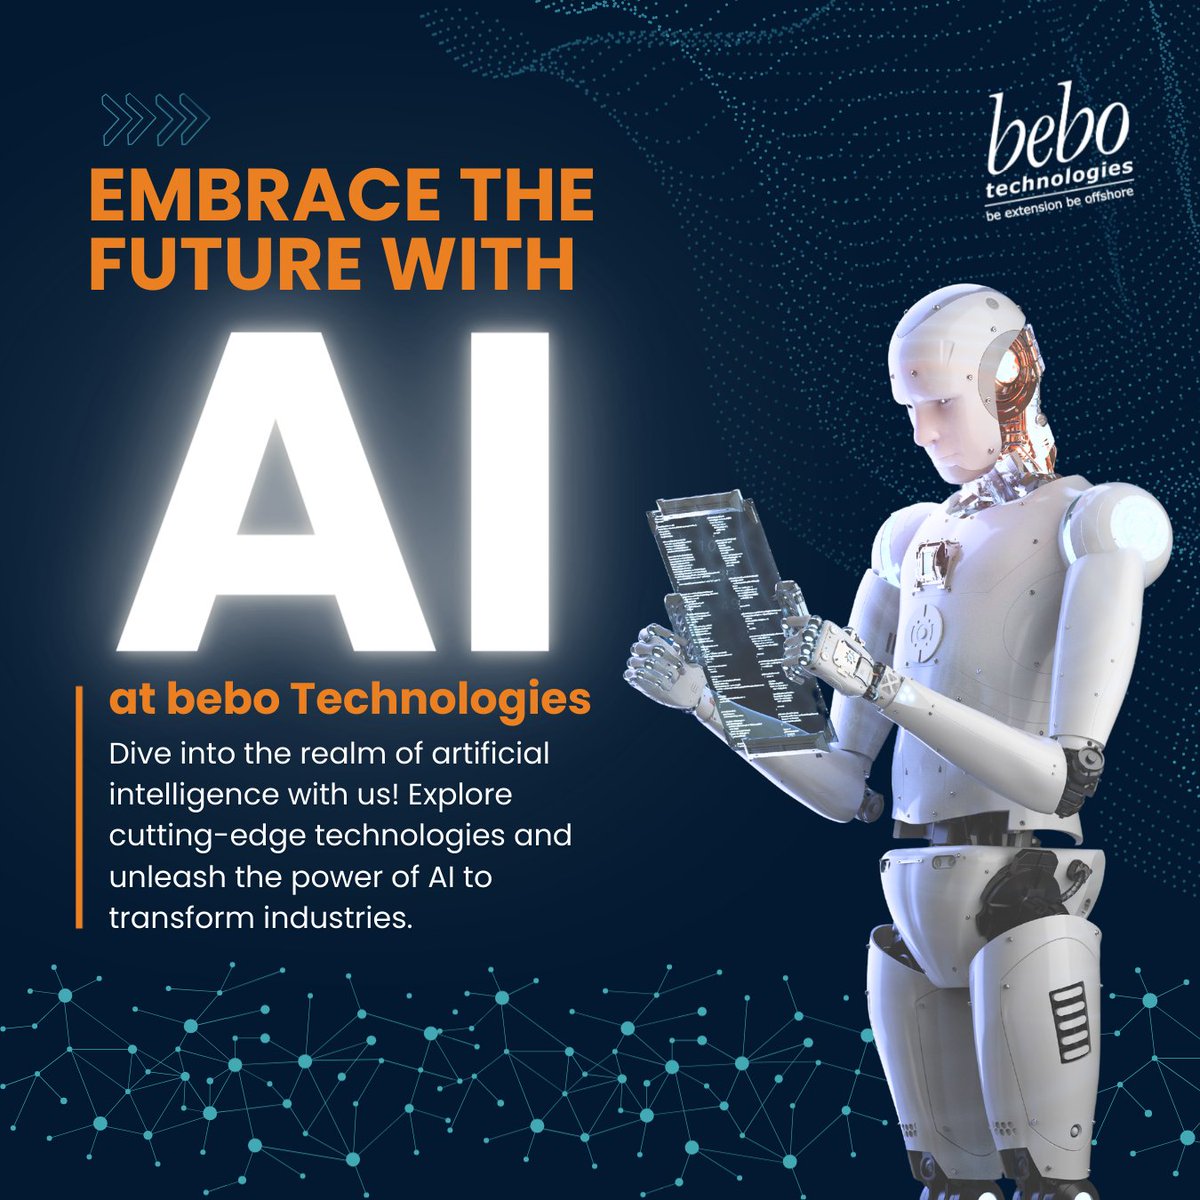 Embrace the transformative power of AI at bebo Technologies. Explore limitless possibilities with us today and expand your understanding of how AI is shaping the future!

Explore More: bit.ly/445EXlr

#AIinnovation #AItransformation #AIinsights #beboTechnologies